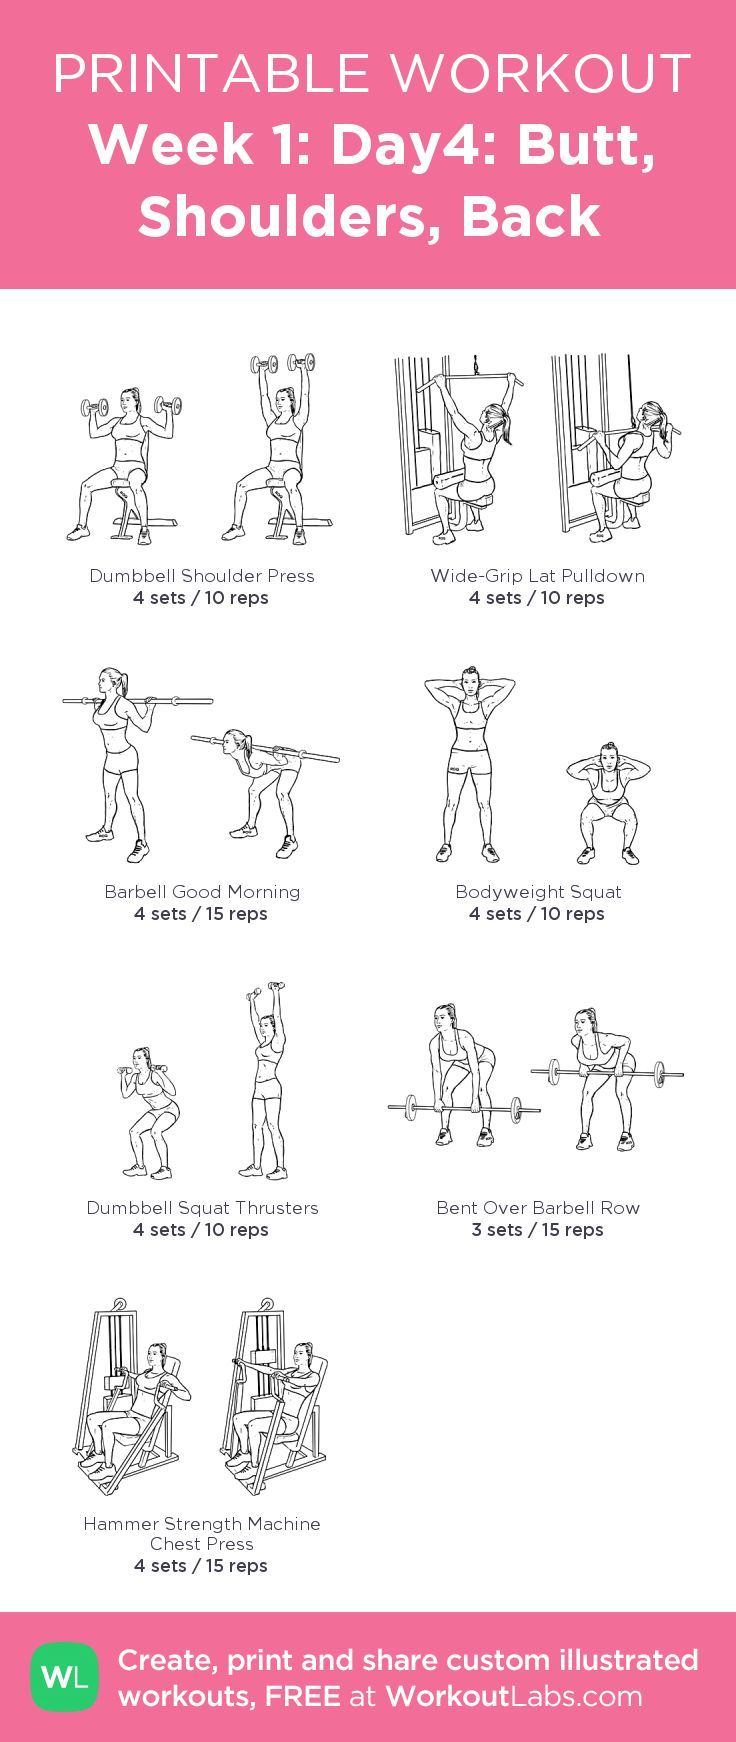 Workouts to Lose Weight Fast : Week 1: Day4: Butt, Shoulders, Back: my custom printable workout 